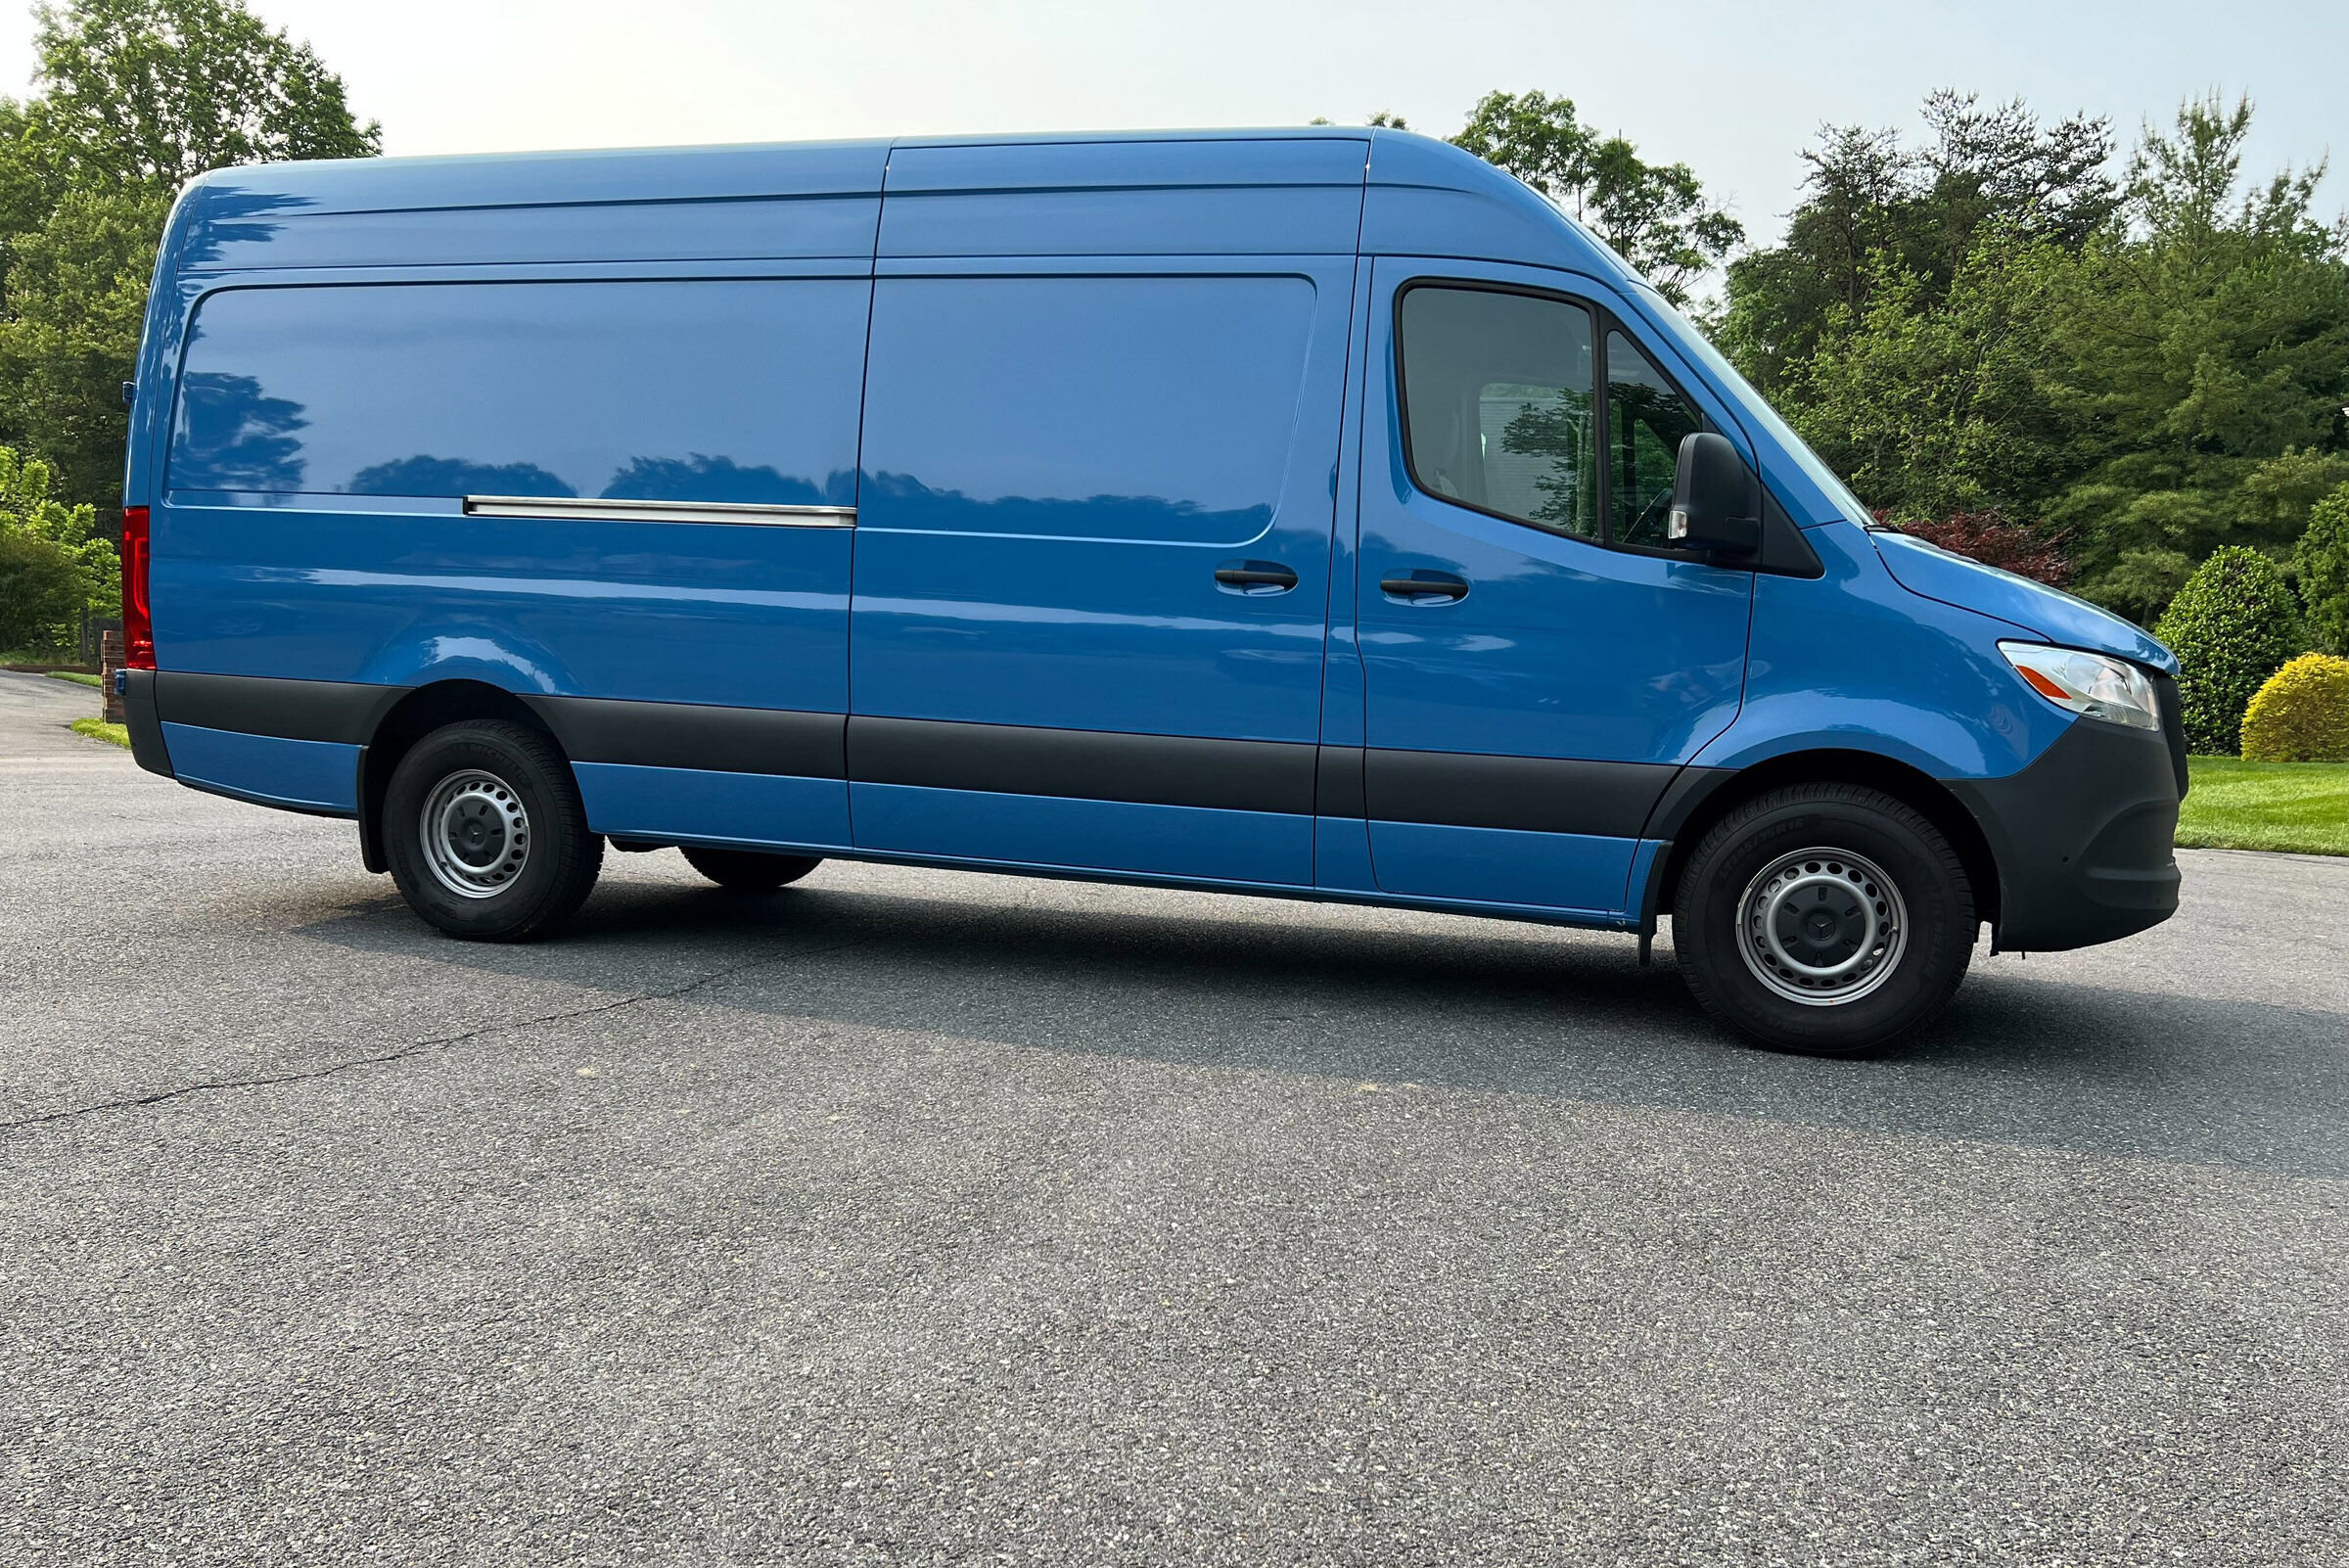 The Mercedes-Benz Sprinter has a reputation for being a great van